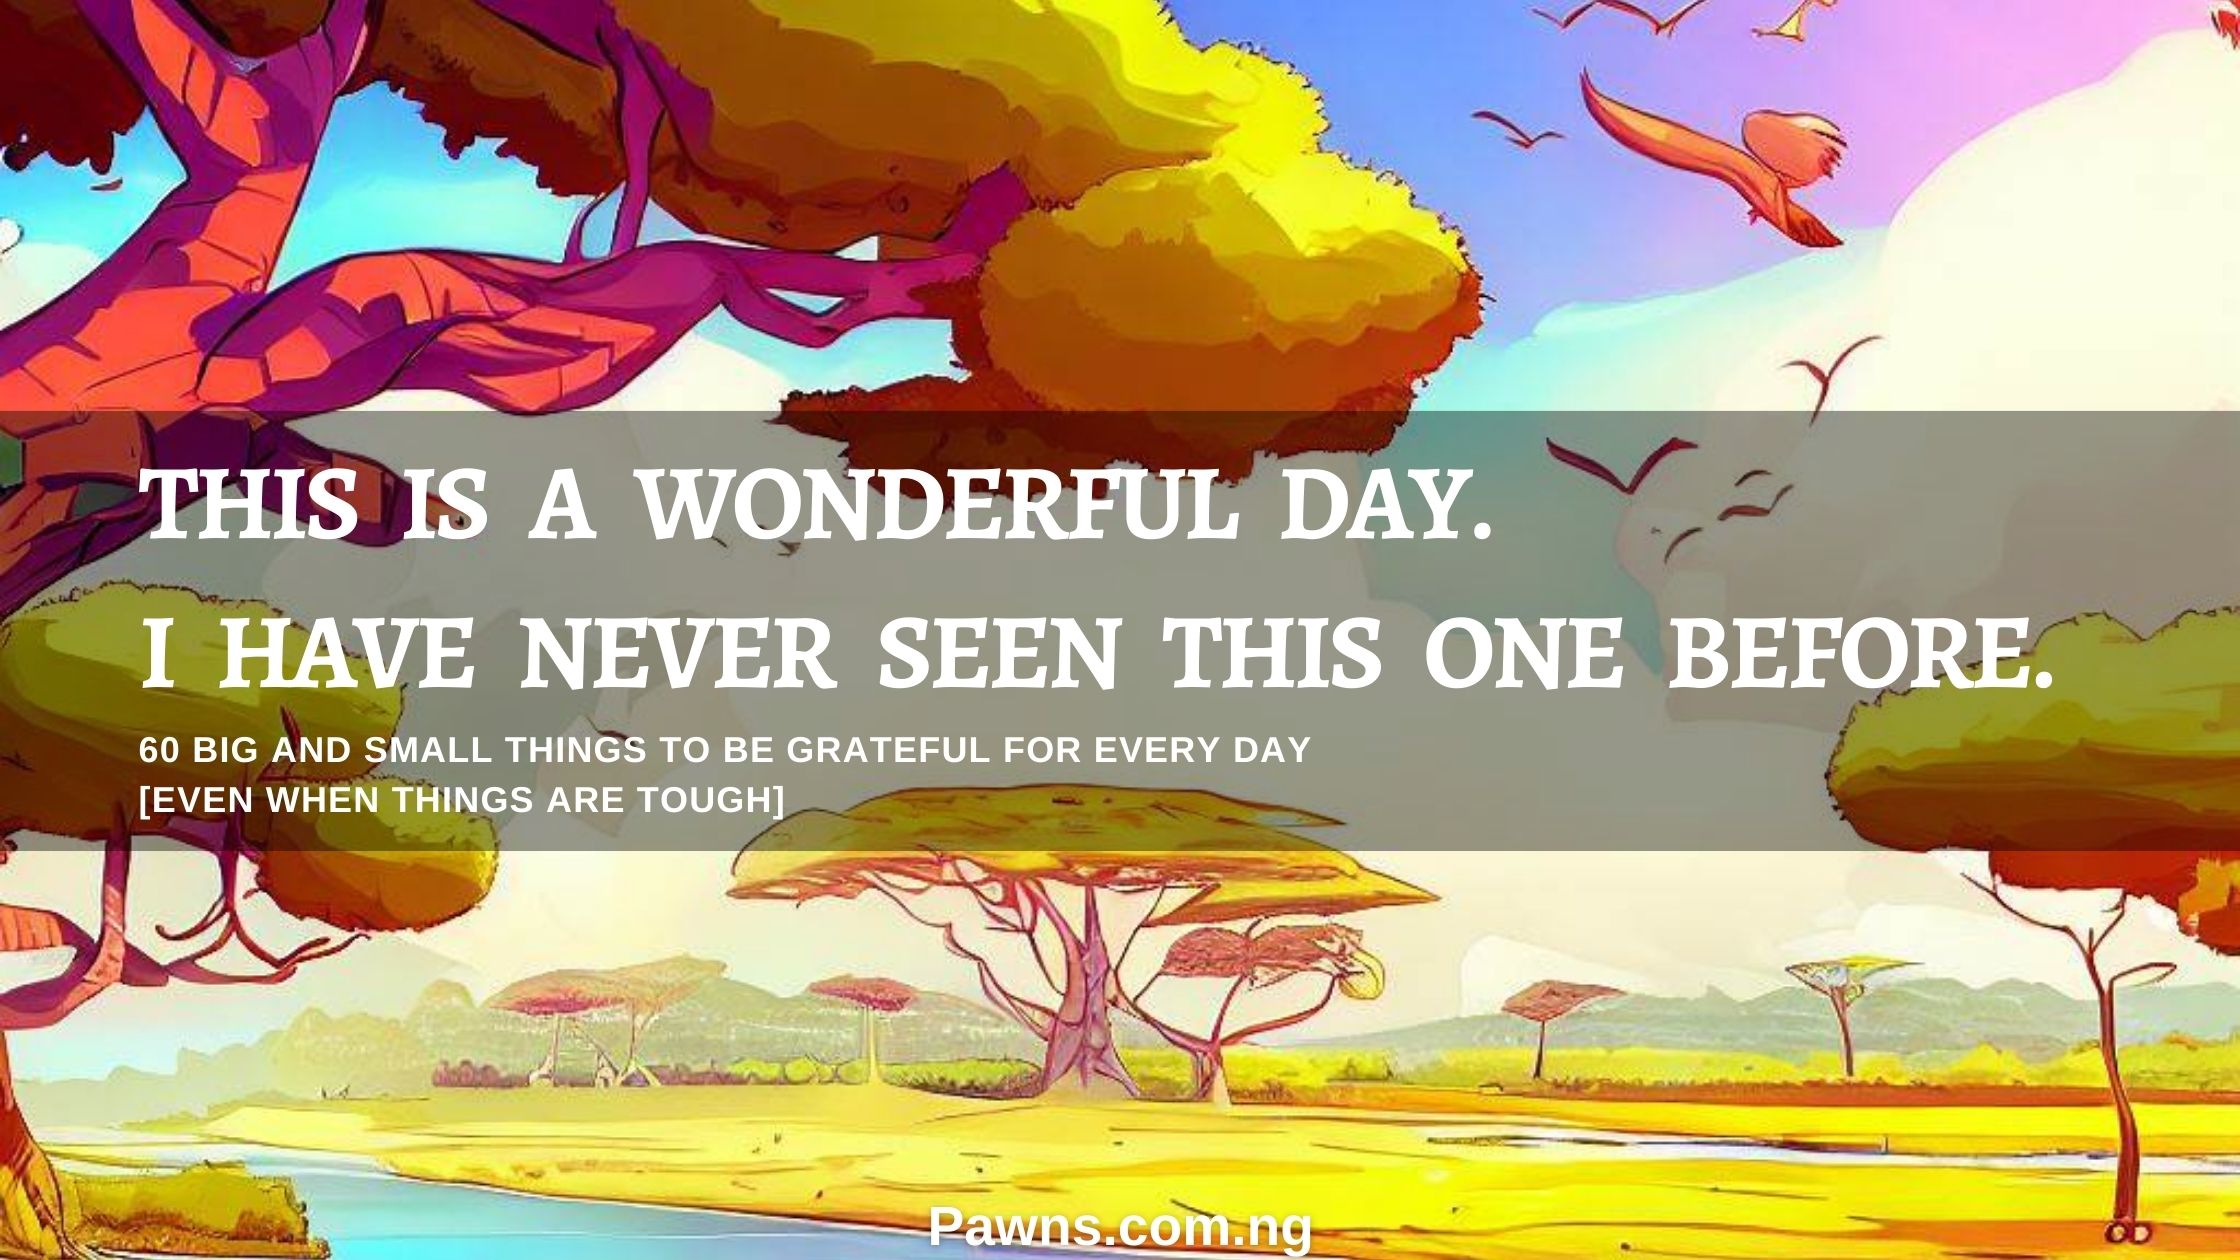 THIS IS A WONDERFUL DAY. I HAVE NEVER SEEN THIS ONE BEFORE. 60 BIG AND SMALL THINGS TO BE GRATEFUL FOR EVERY DAY [EVEN WHEN THINGS ARE TOUGH]